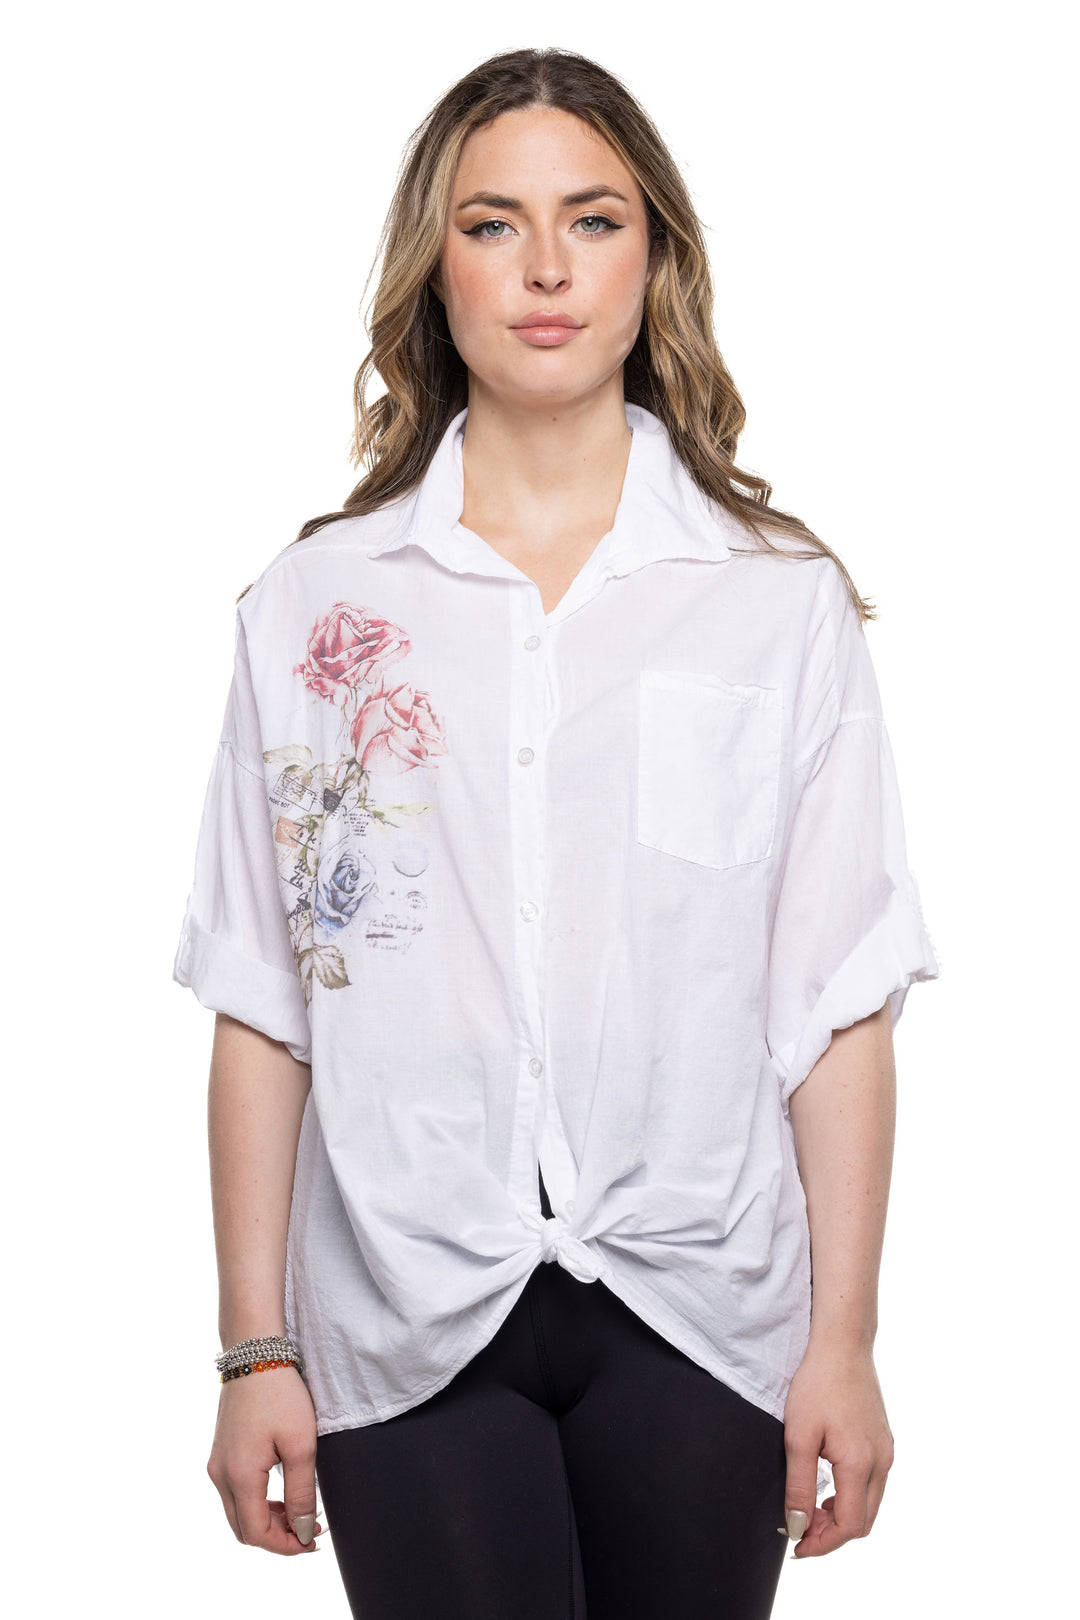 Etern Elle Summer 2024 This classic blouse features 3/4 length button cuffed sleeves and a front patch pocket for added convenience. Tie it up for a cool look that exudes style and versatility. 